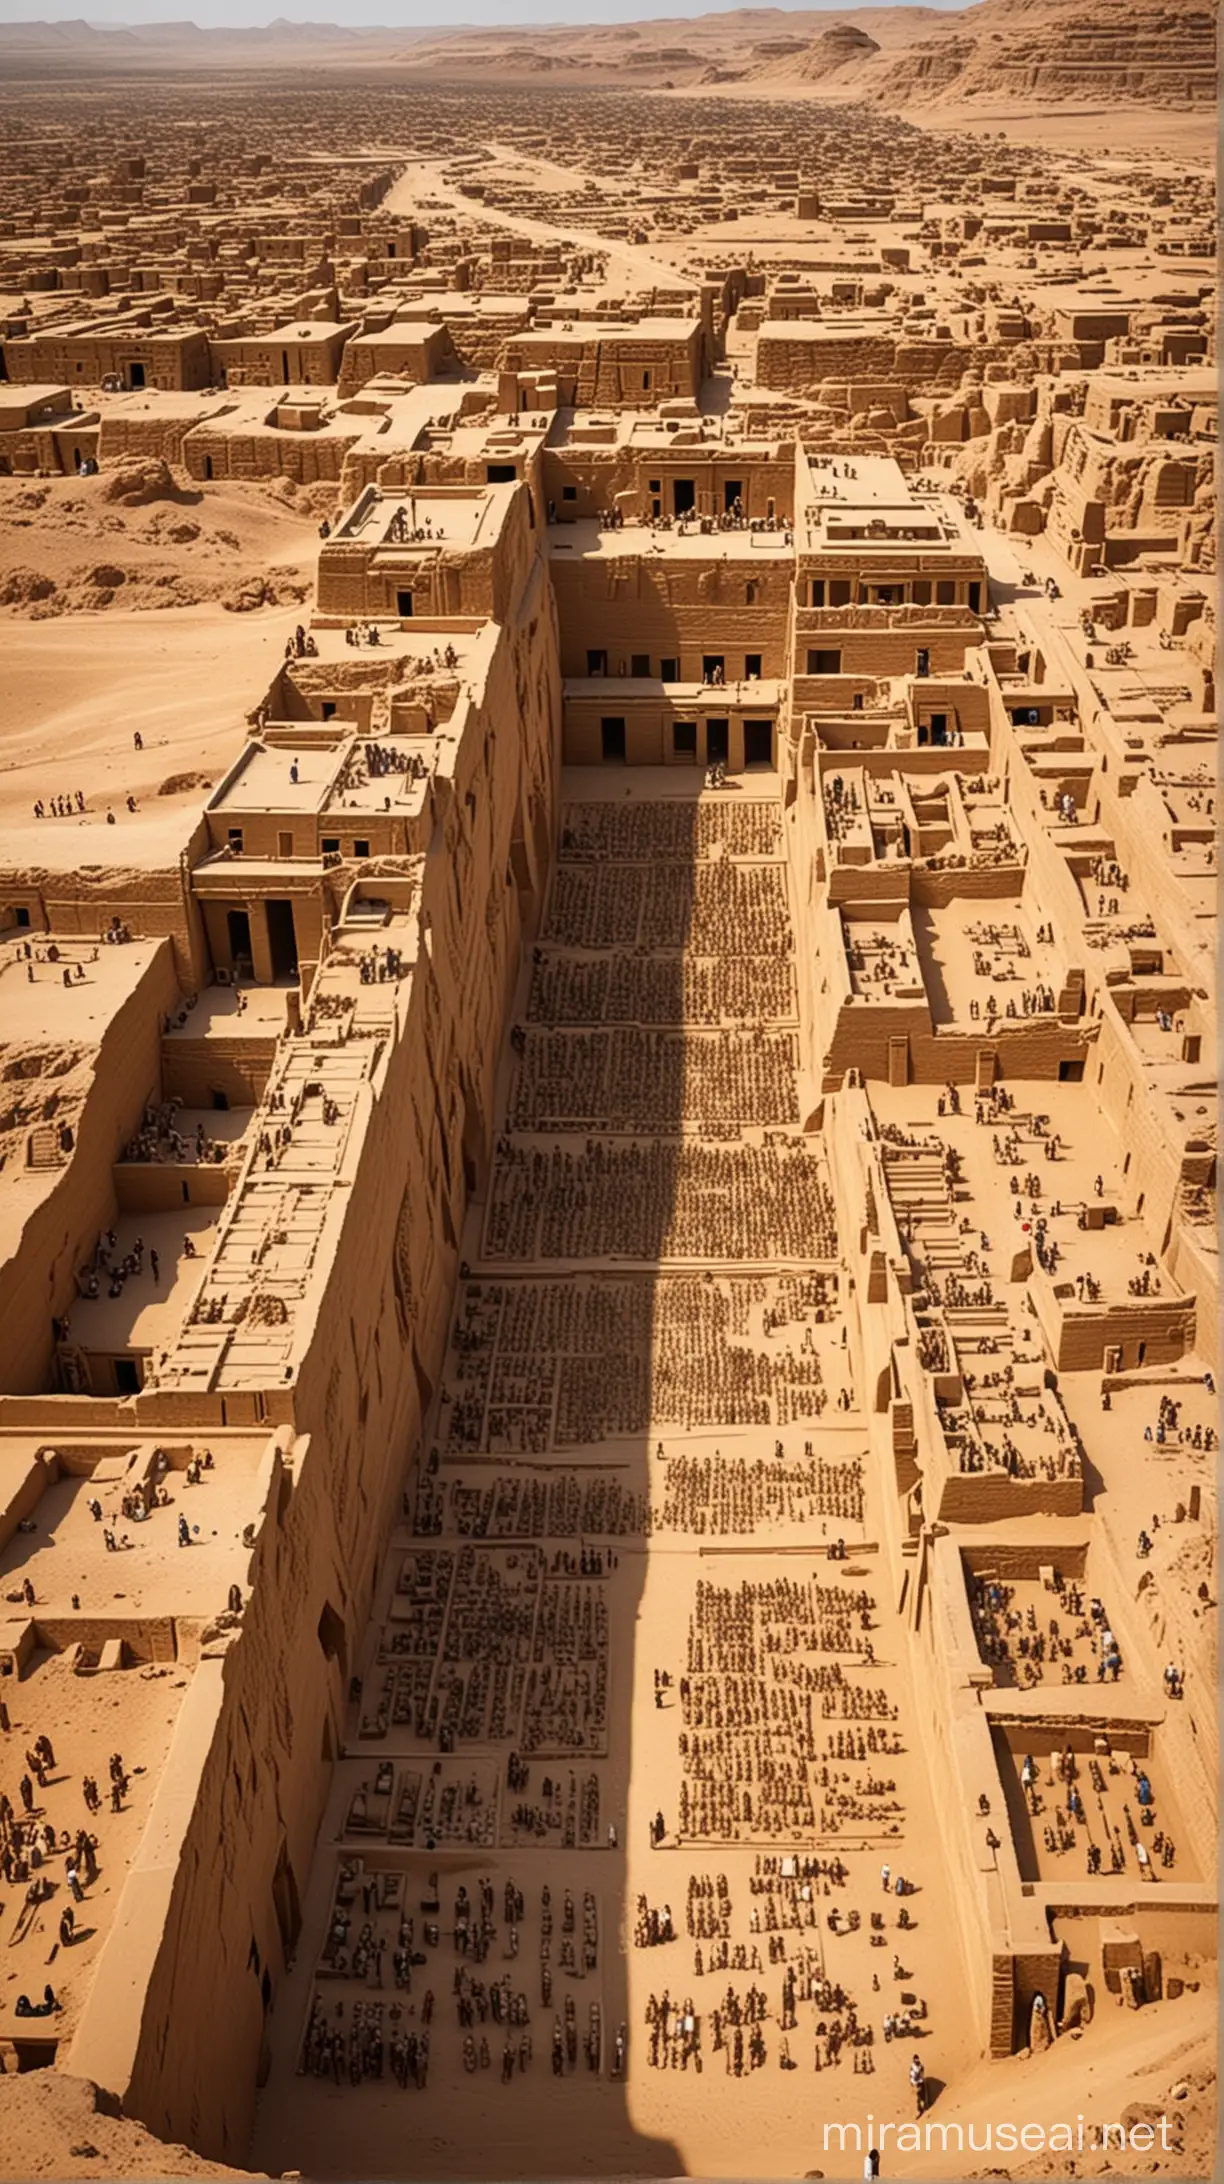 Bustling Ancient Egyptian City with Human Figures